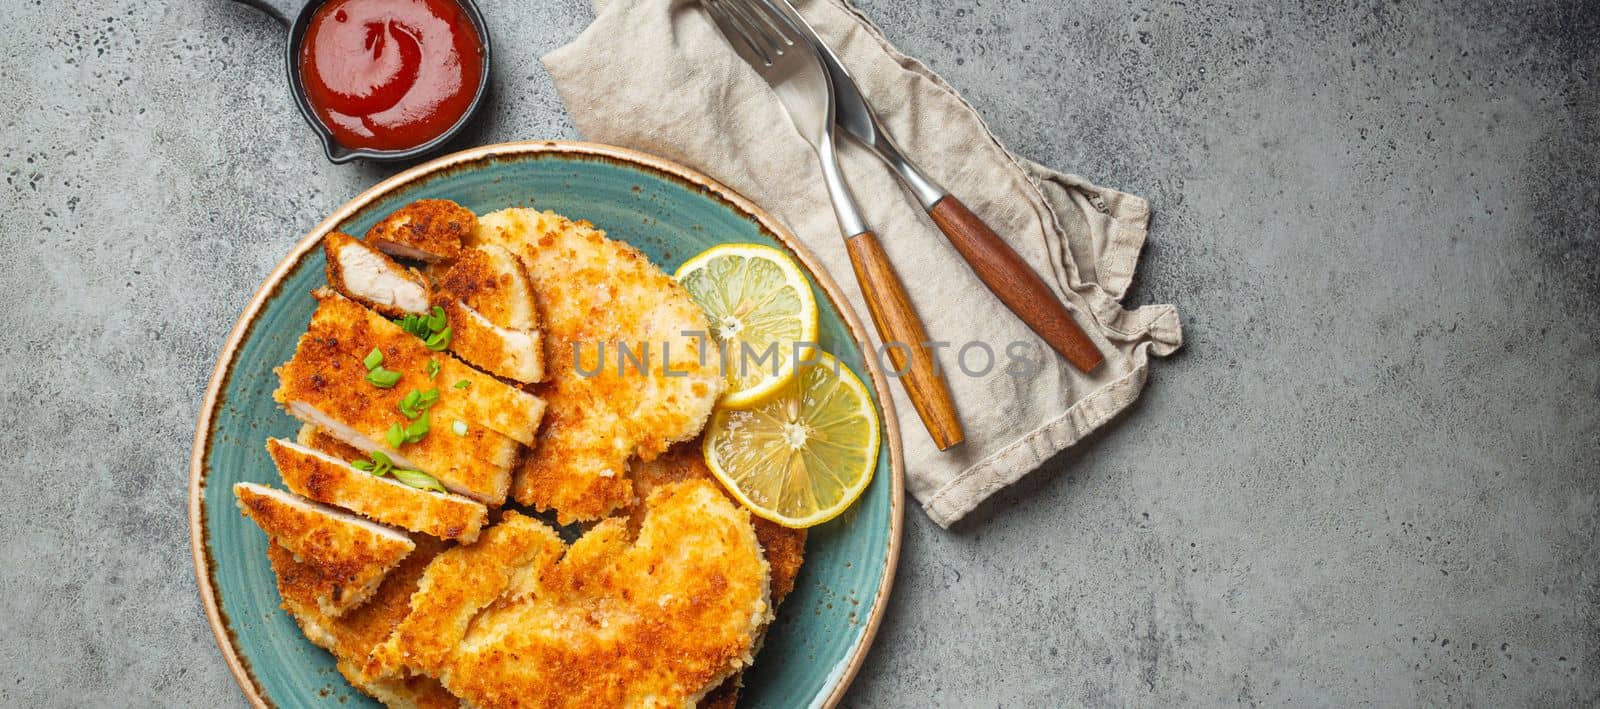 Crispy panko breaded fried chicken fillet with green salad and lemon cut on plate on gray background table with ketchup from above. Japanese style deep fried coated chicken breasts, space for text.